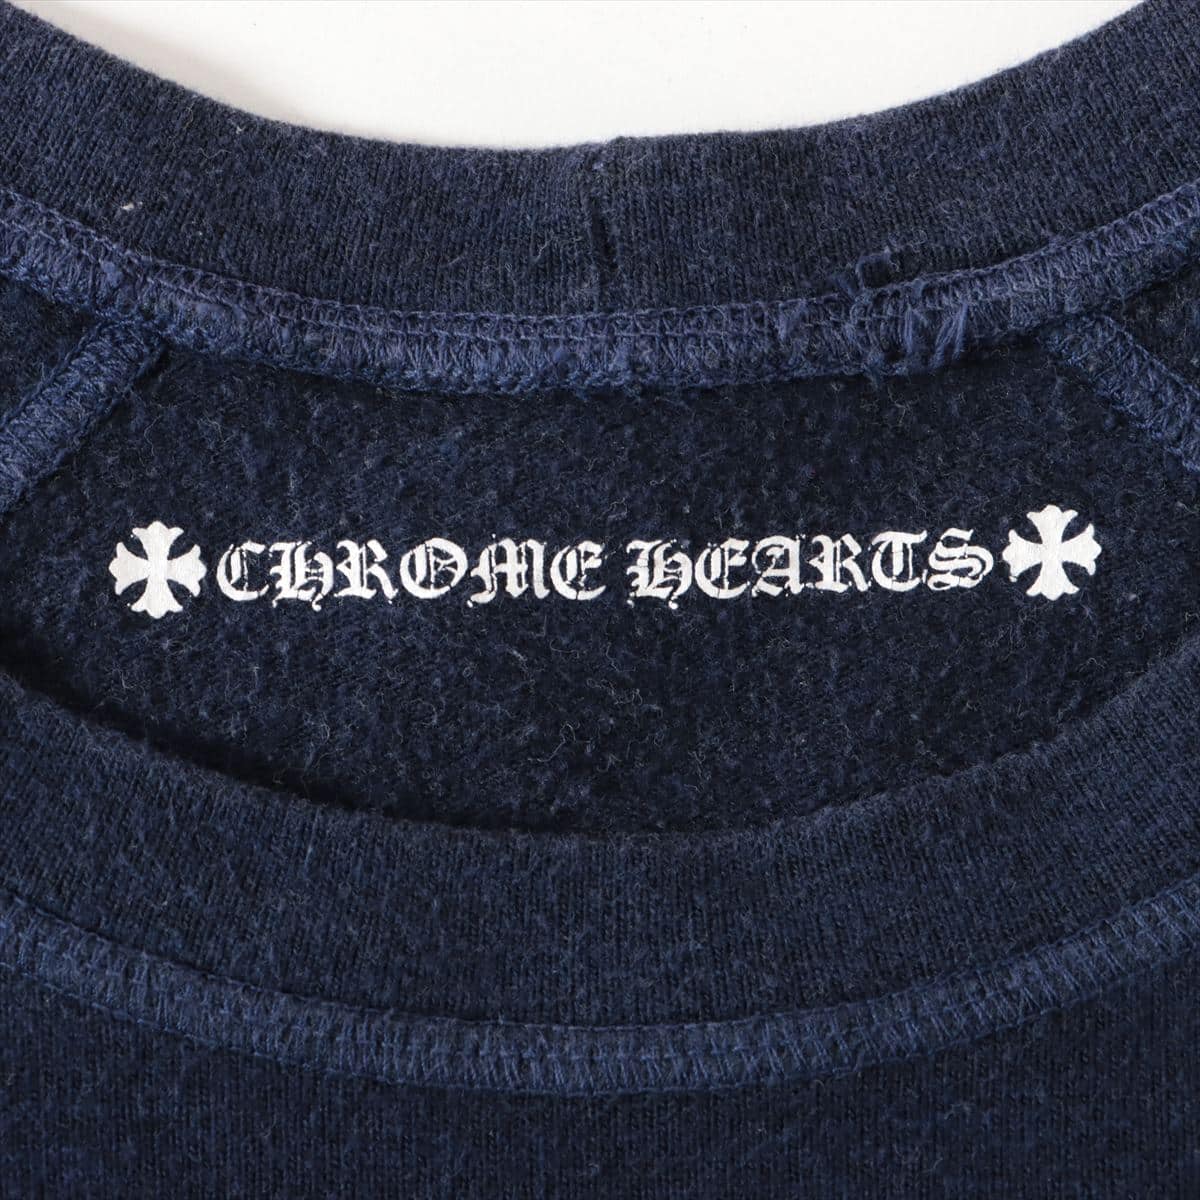 Chrome Hearts Cut and sew Cotton & polyester S Navy blue striped heart print short sleeve sweatshirt